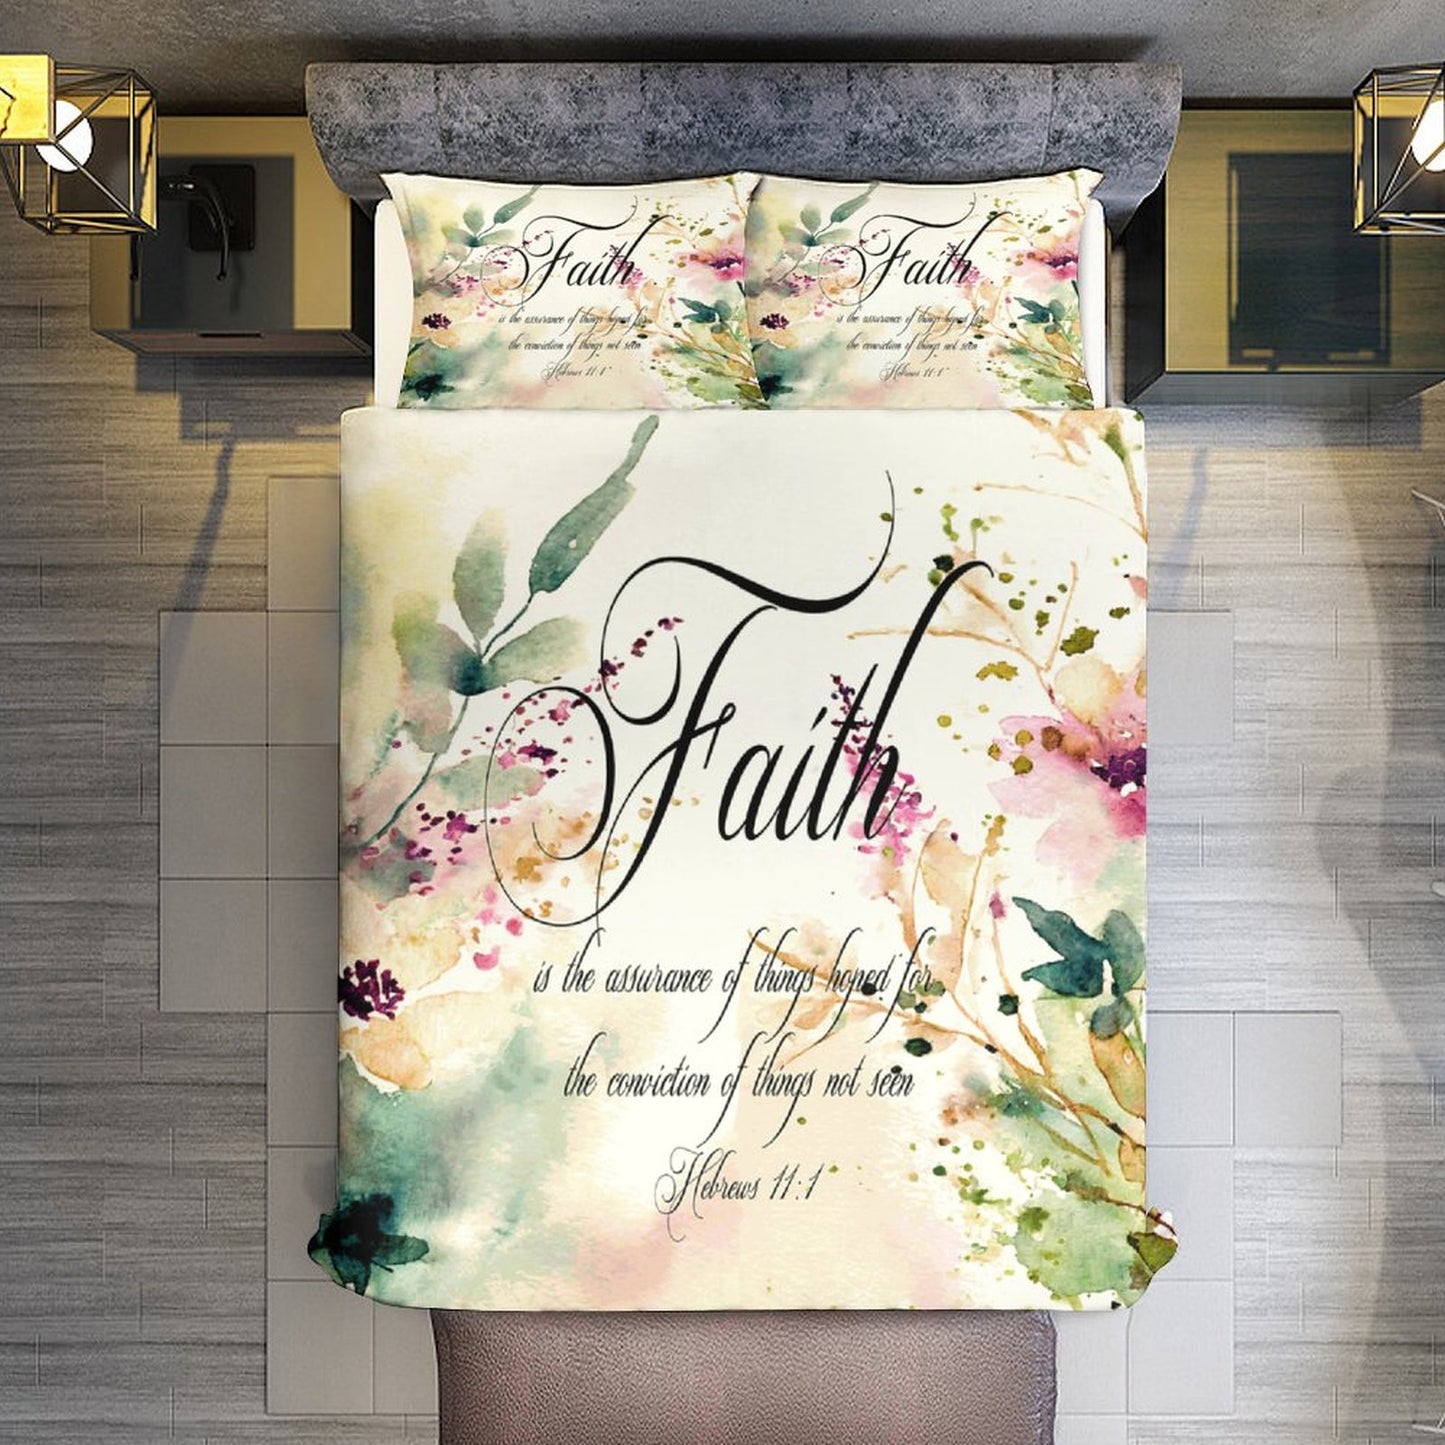 Faith Is The Assurance Of Things Hoped For  3-Piece Christian Comforter Bedding Set